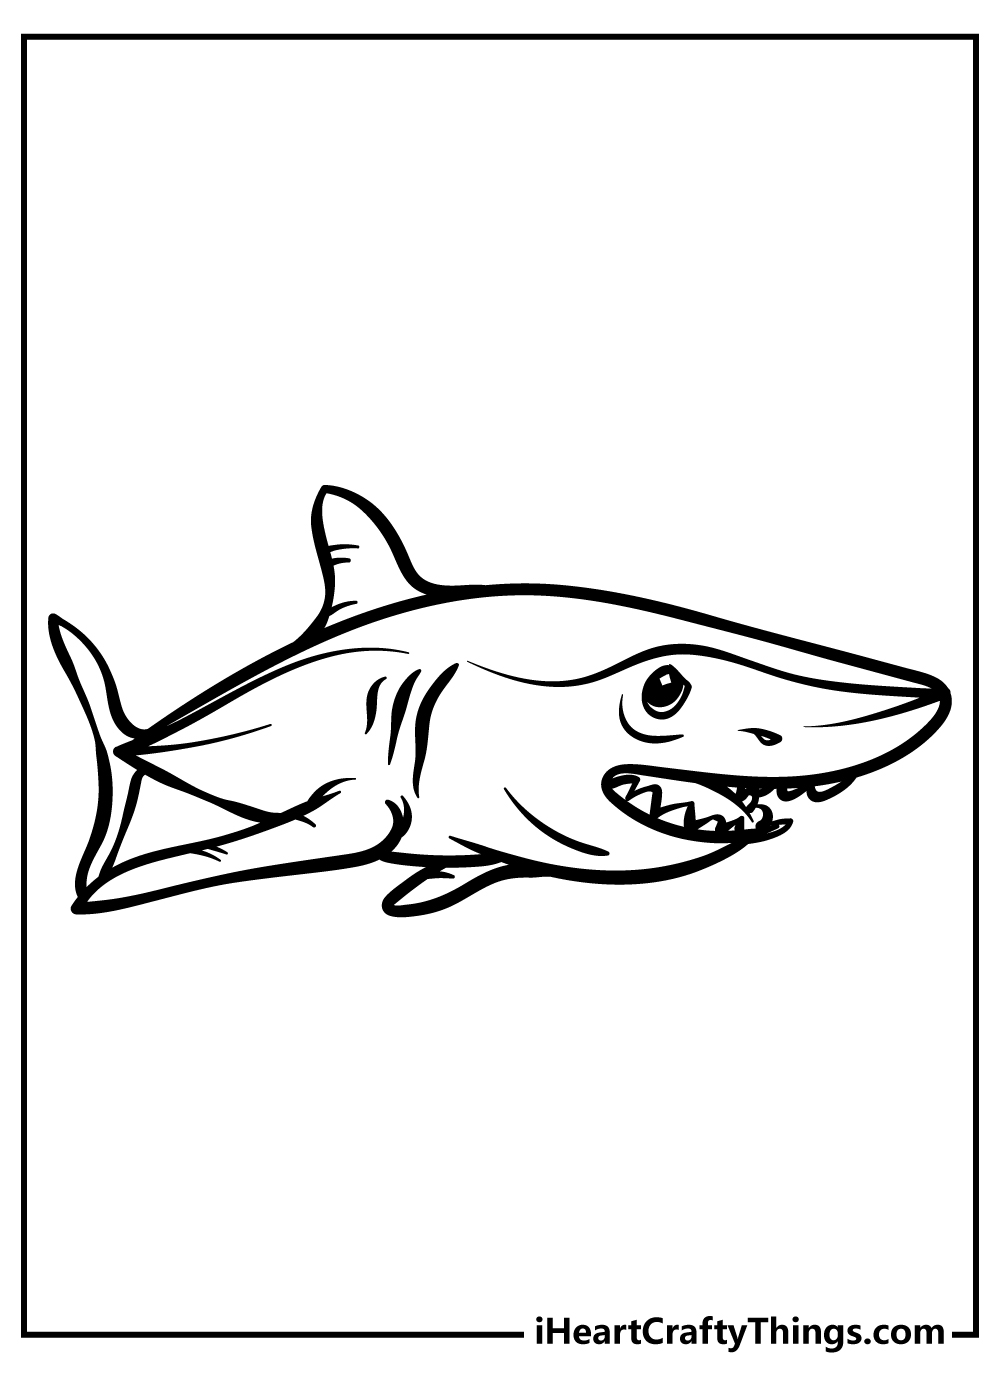 Shark coloring pages free printables